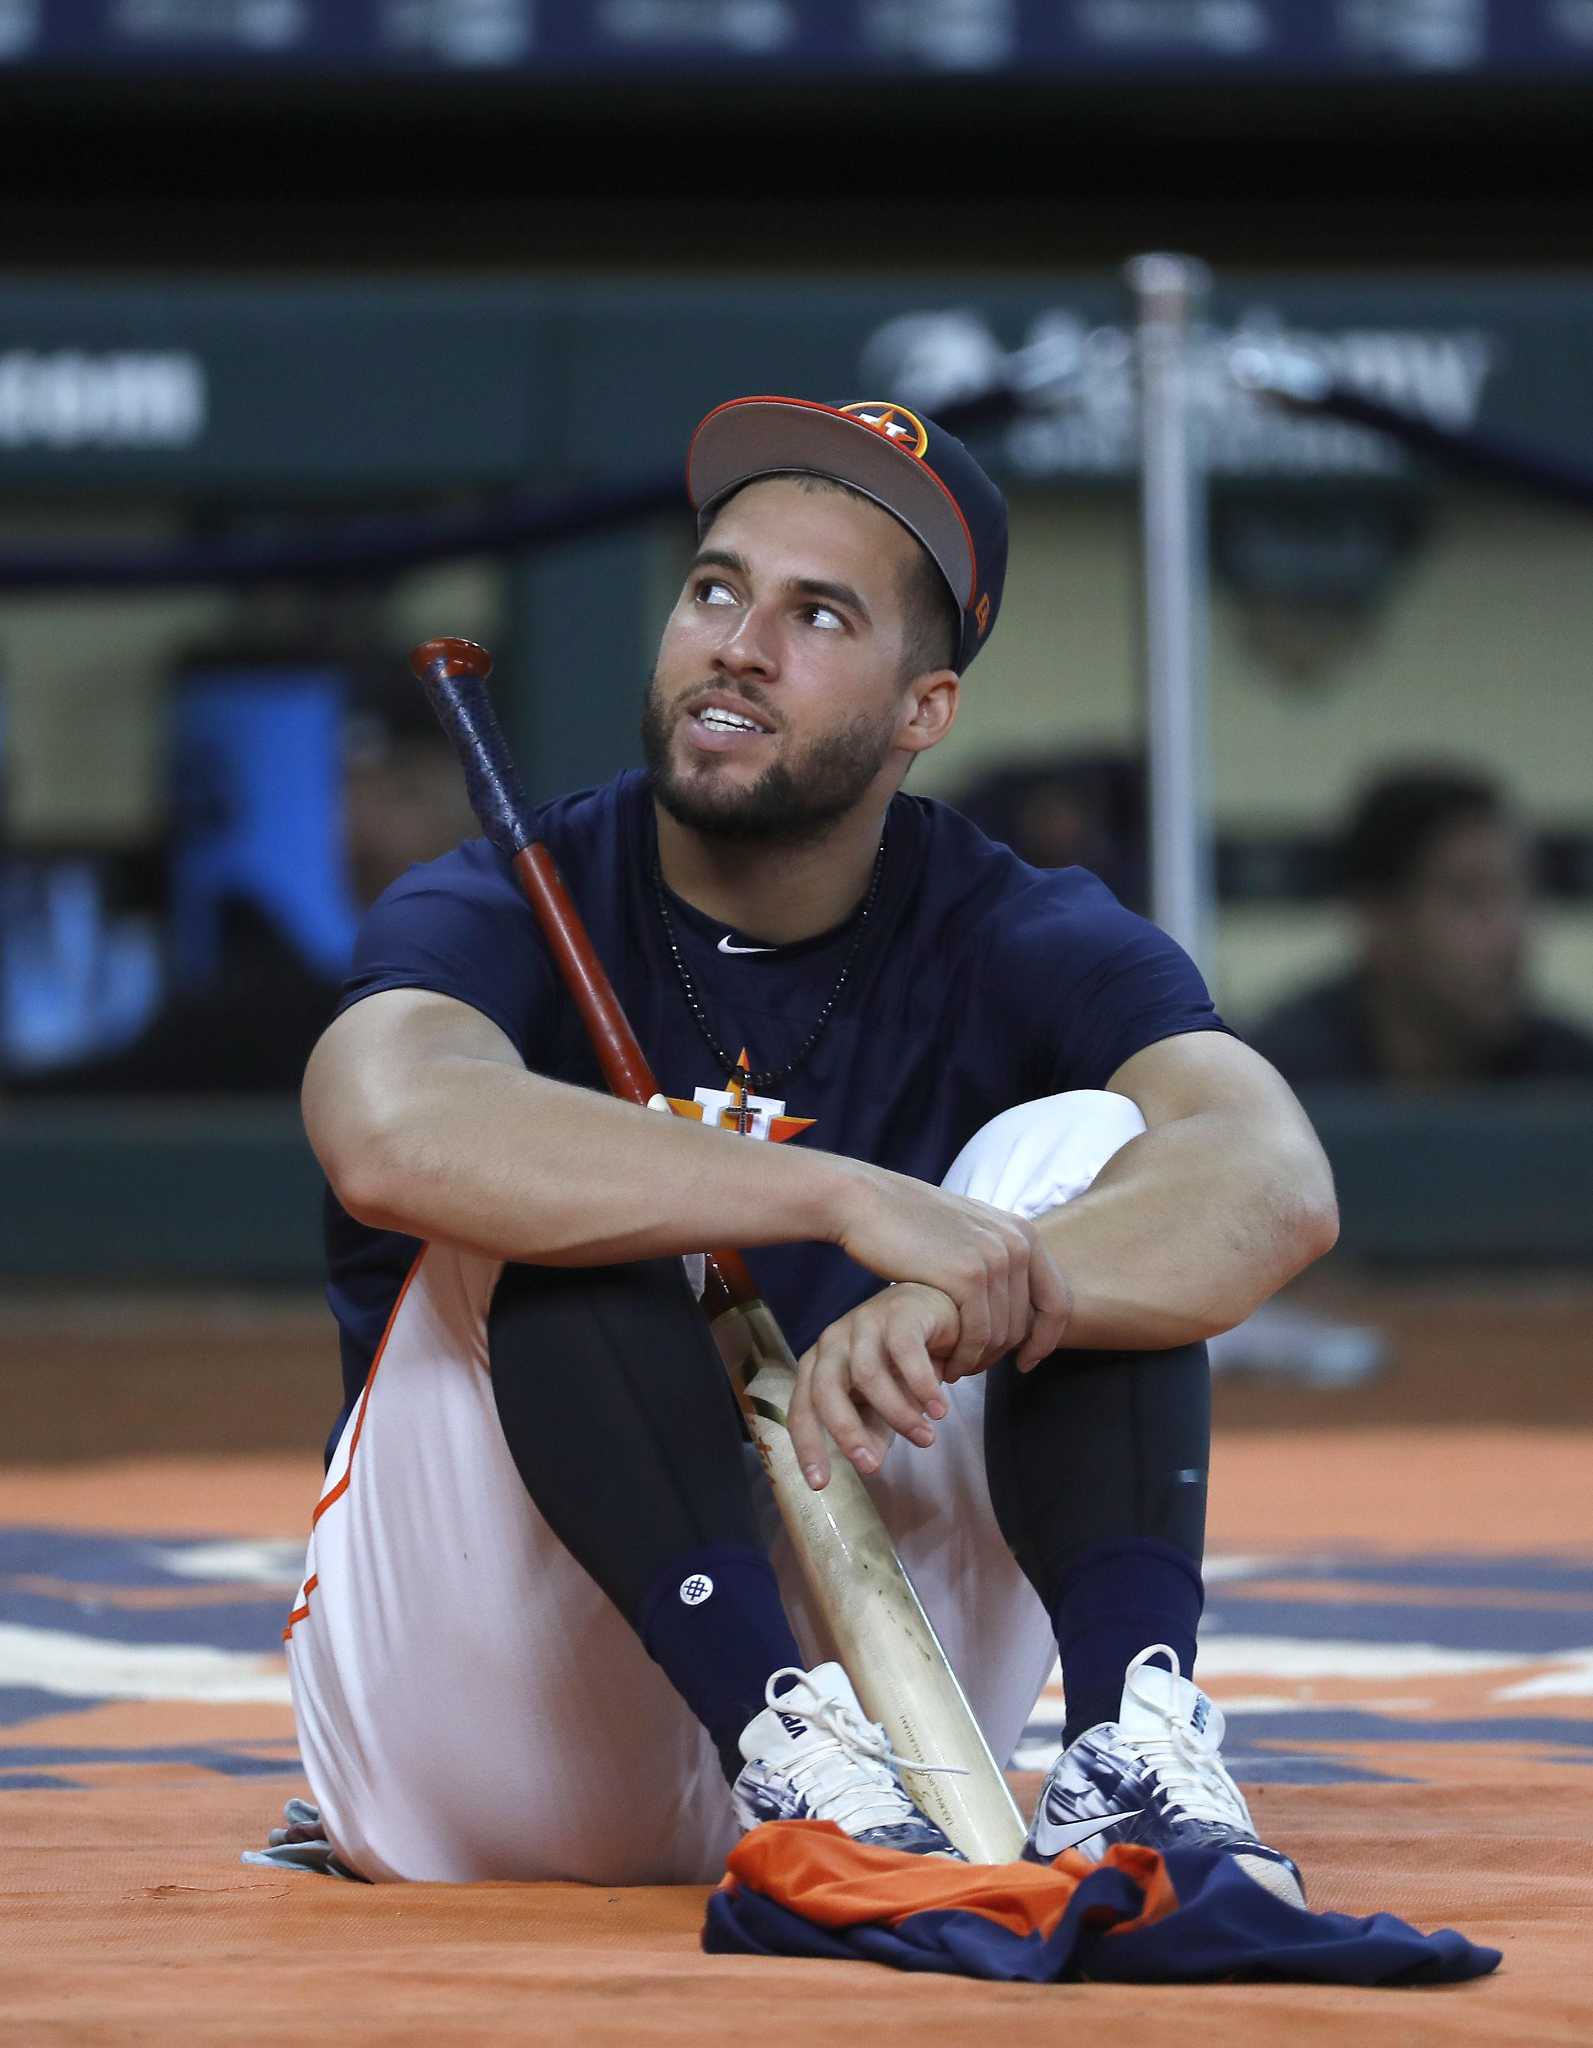 George Springer scratched from Astros' lineup with quad soreness - Houston Chronicle